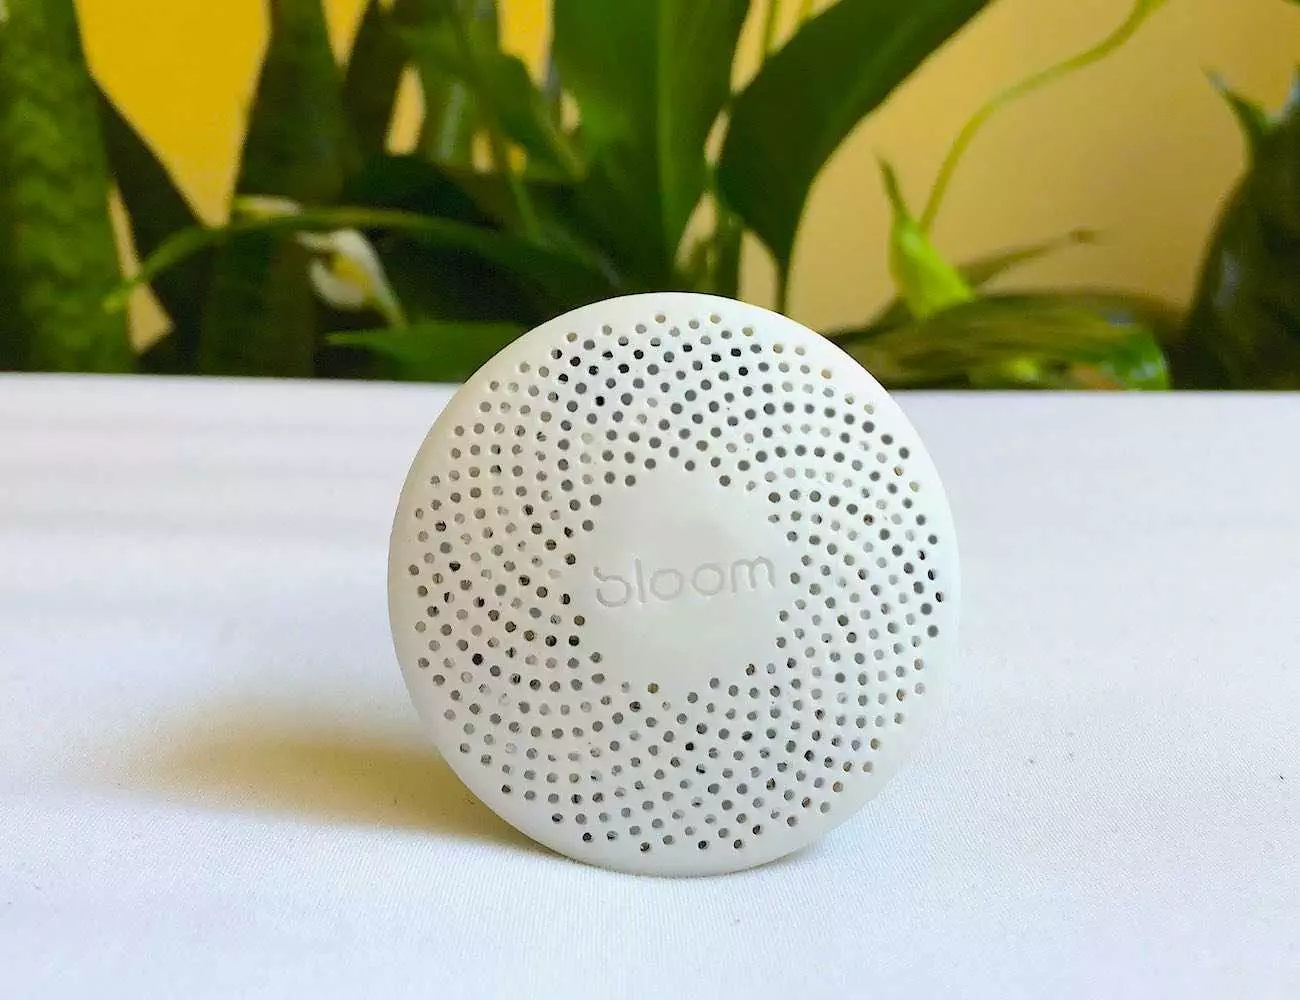 Close Up Shot Of The Bloom Portable Air Quality Monitor